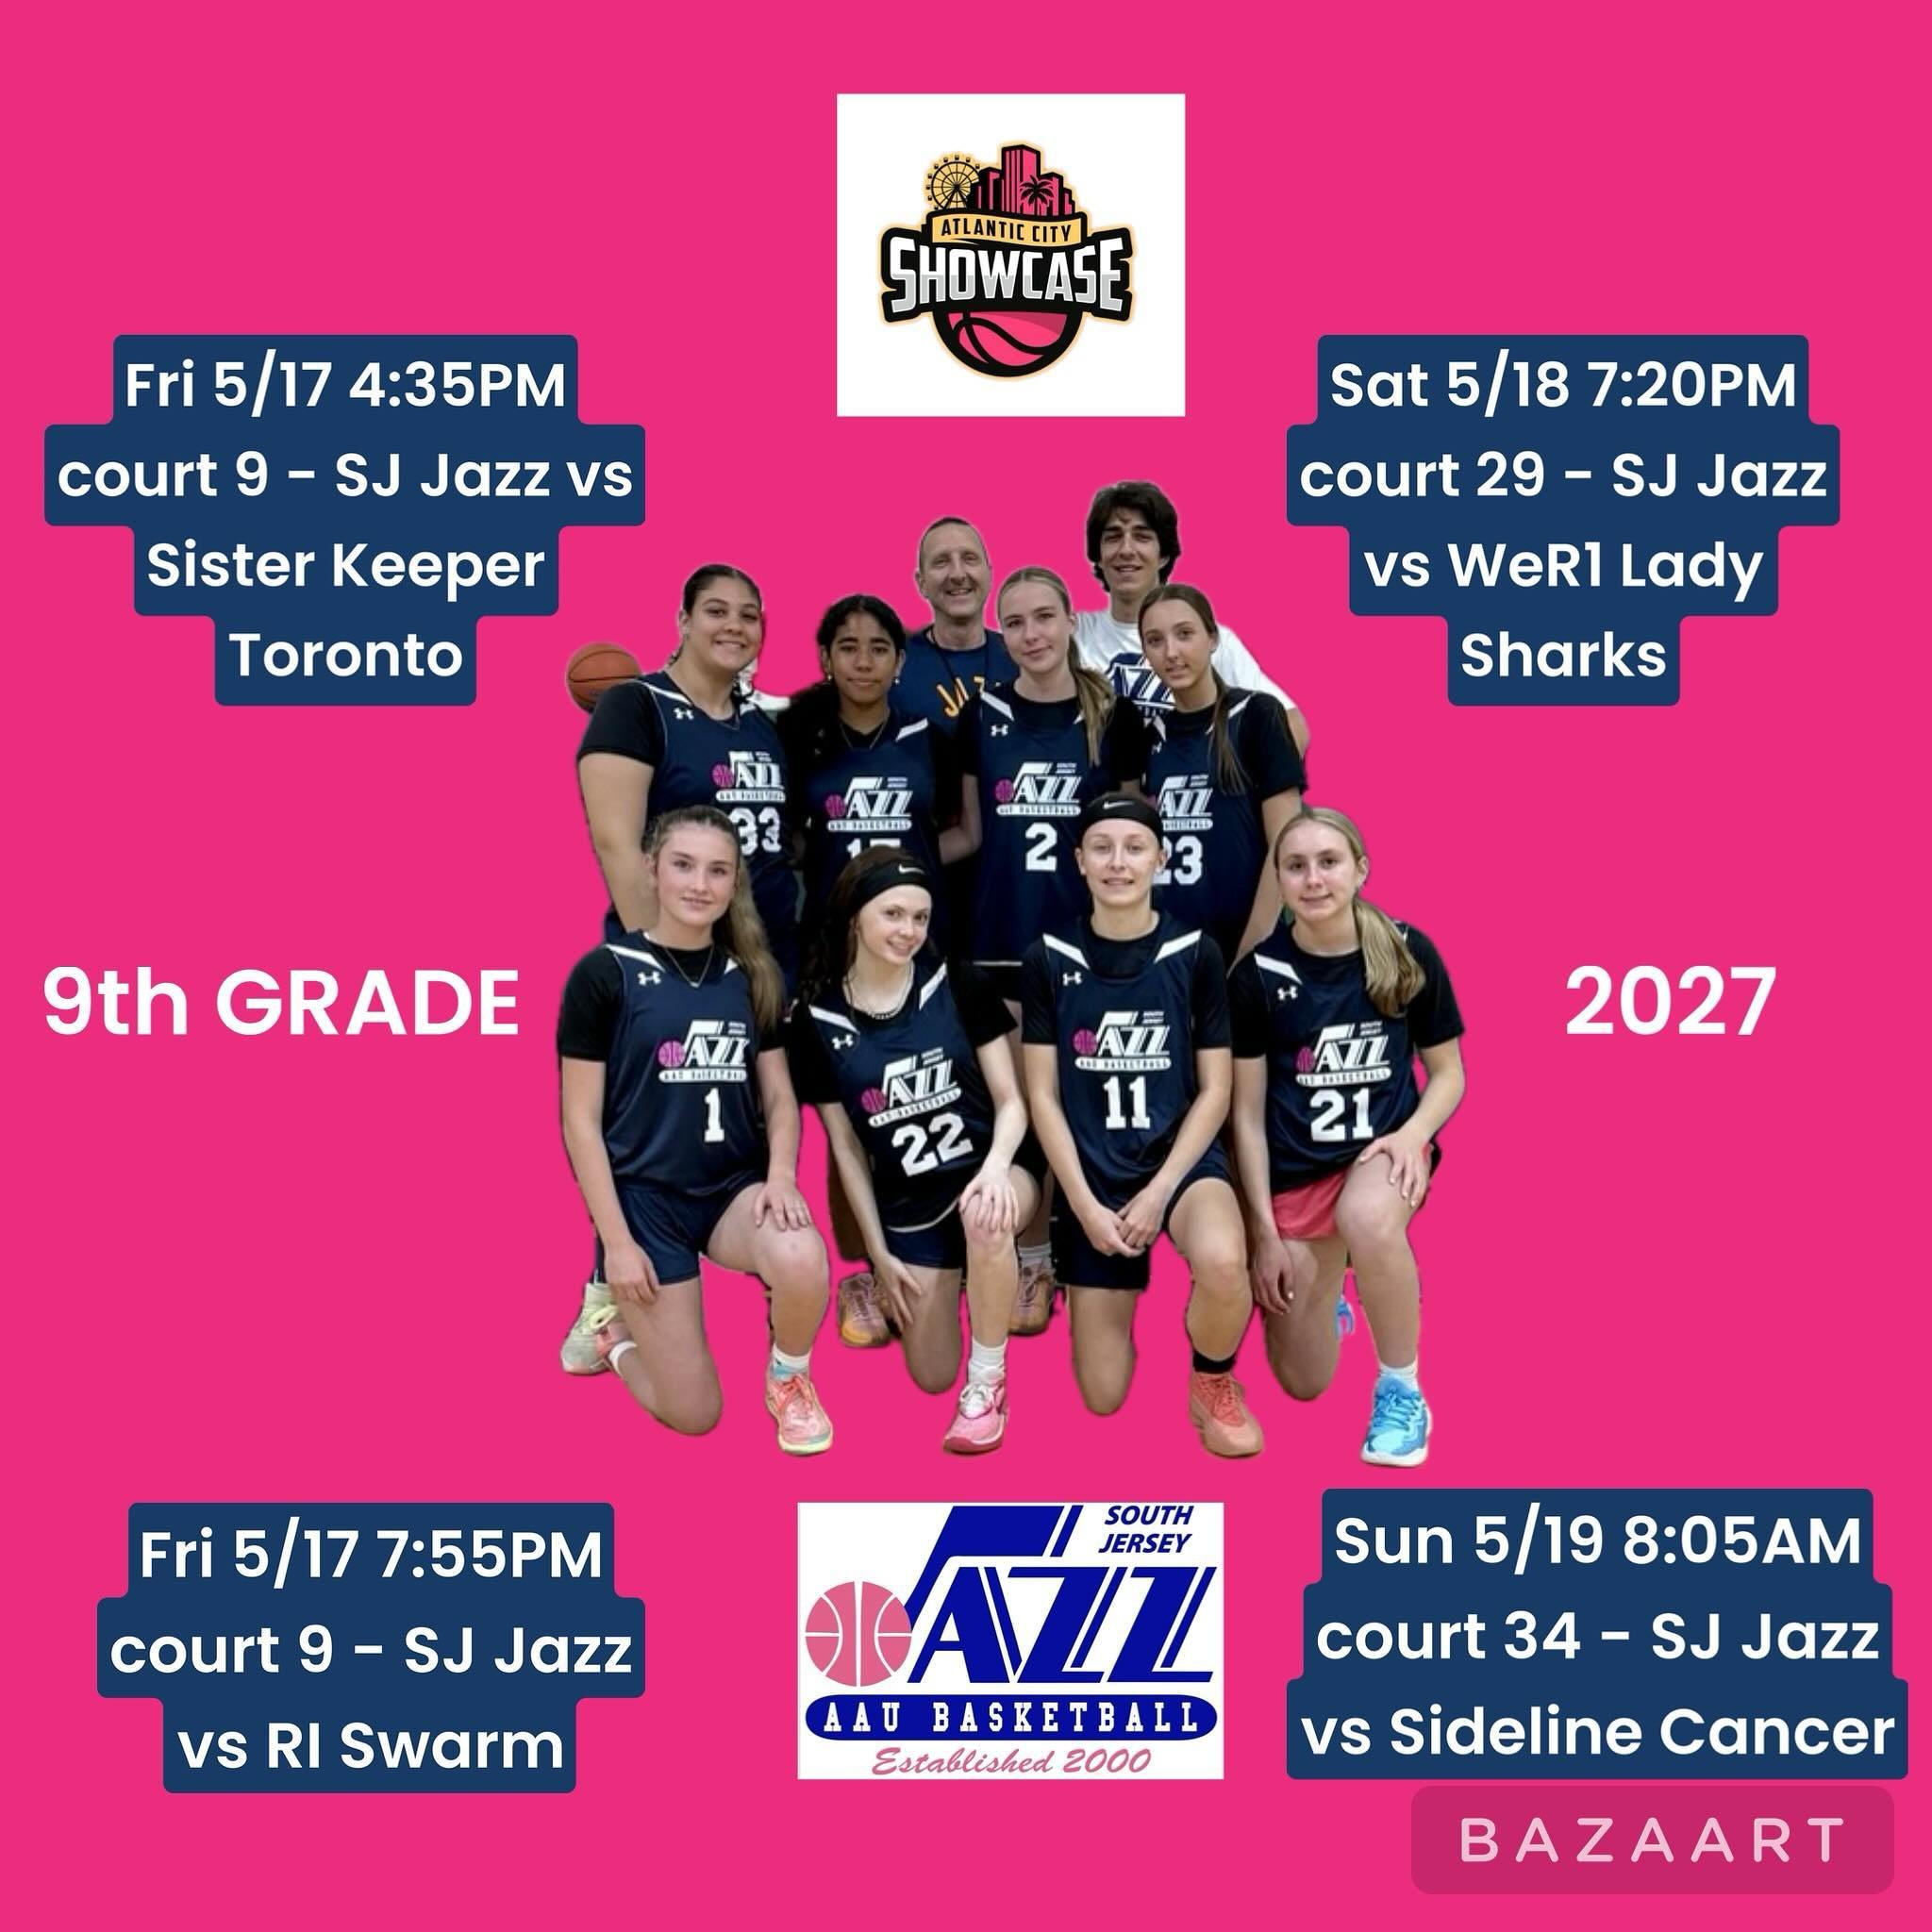 🔥BEST OF LUCK TO OUR SJ JAZZ 9th GRADE TEAM IN THE AC SHOWCASE! COME CHECK OUT OUR TALENTED GIRLS SHOWCASE THEMSELVES! GO JAZZ!🔥